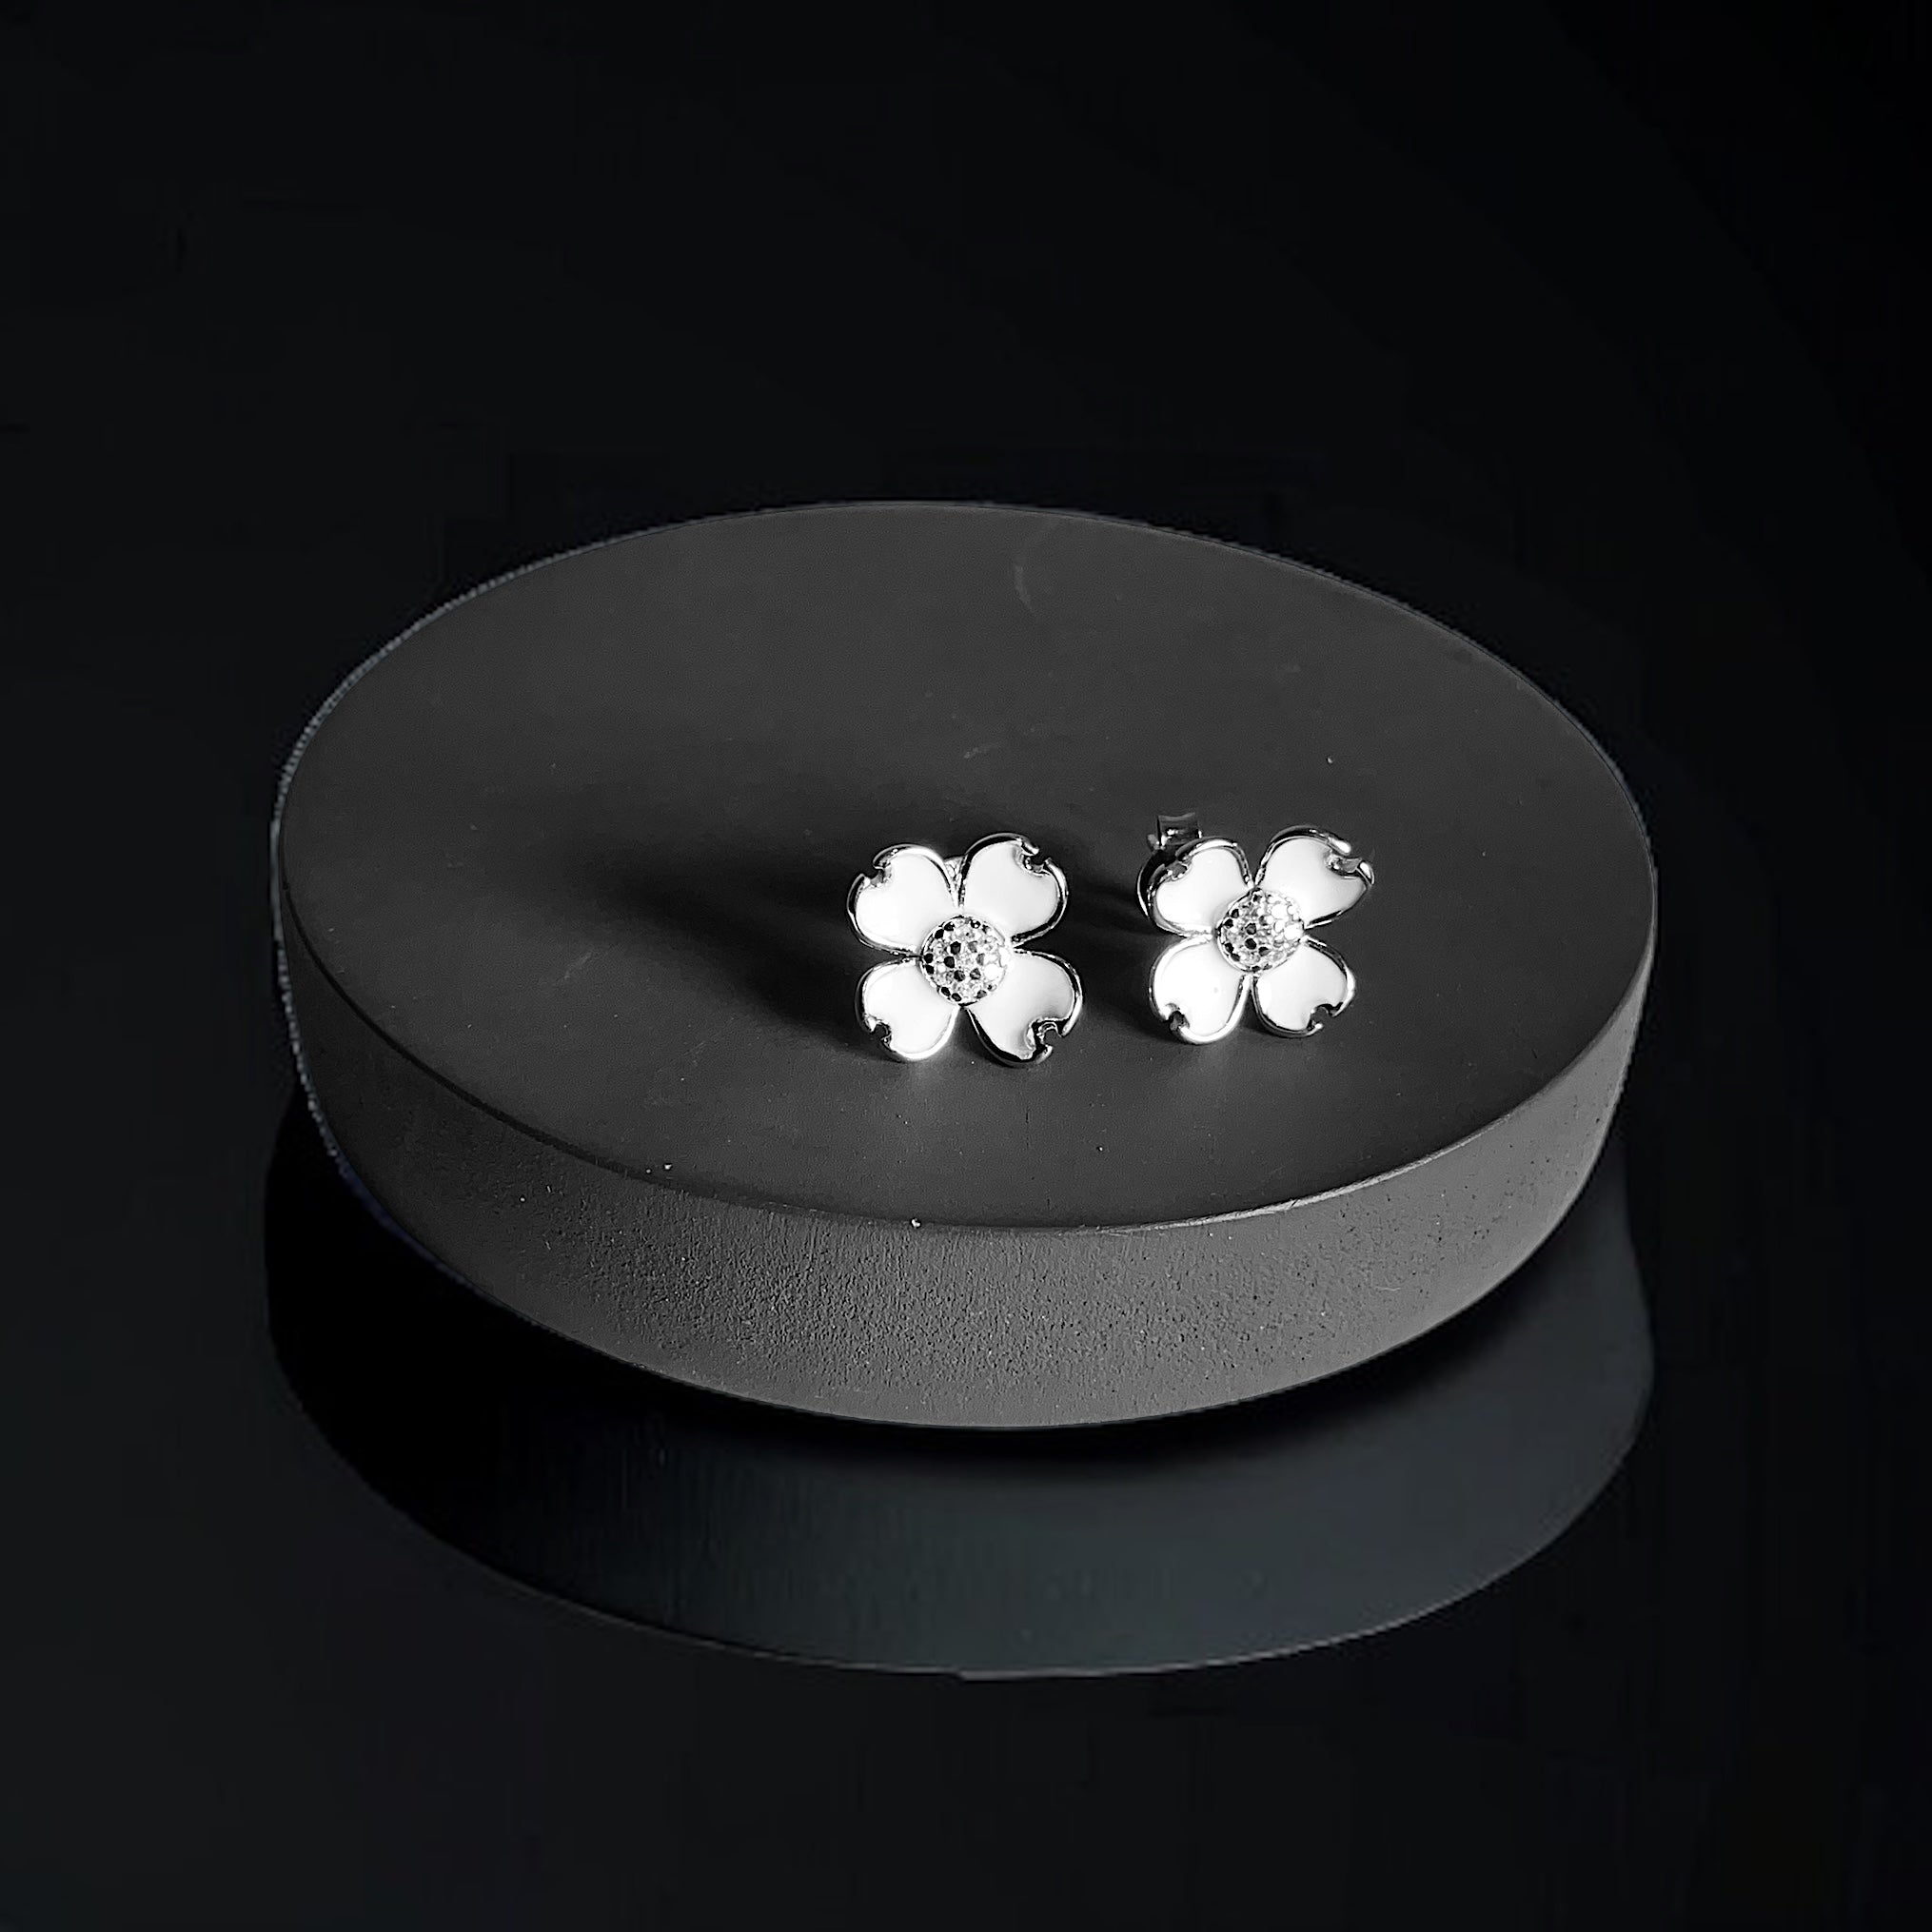 a pair of white flower earrings sitting on a black surface